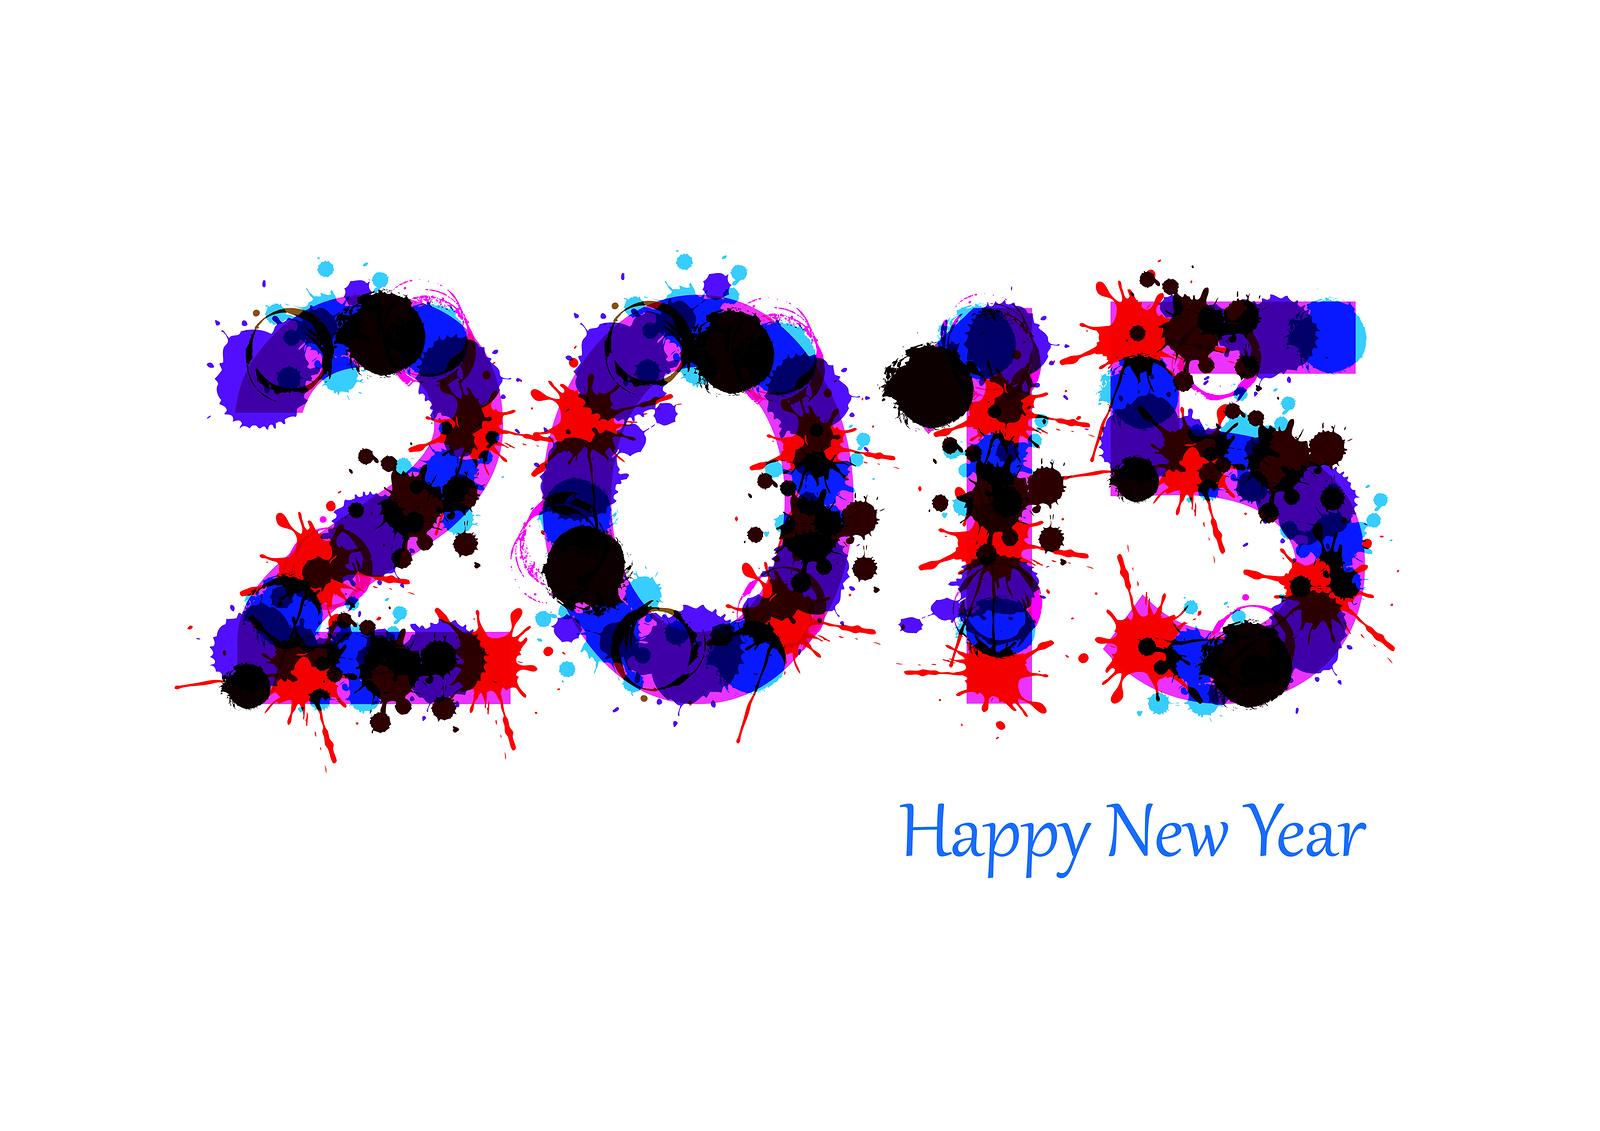 Happy New Year Image And Wallpaper